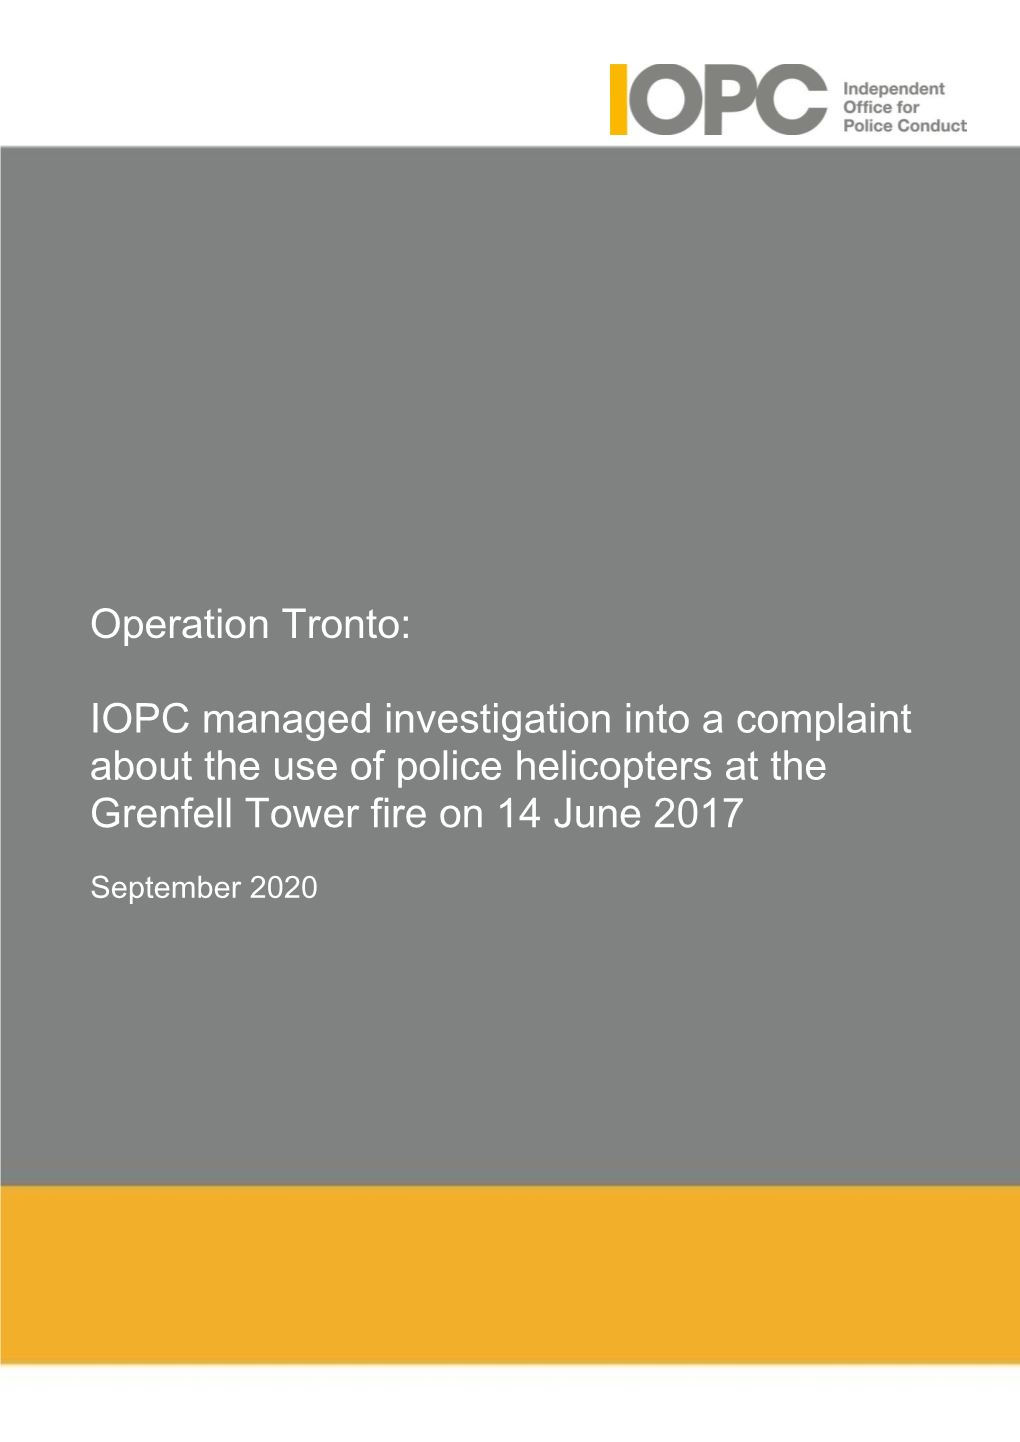 Grenfell Fire, Calls Were Made to the Emergency Services from People Inside the Tower Asking to Be Rescued by NPAS Helicopters On-Scene